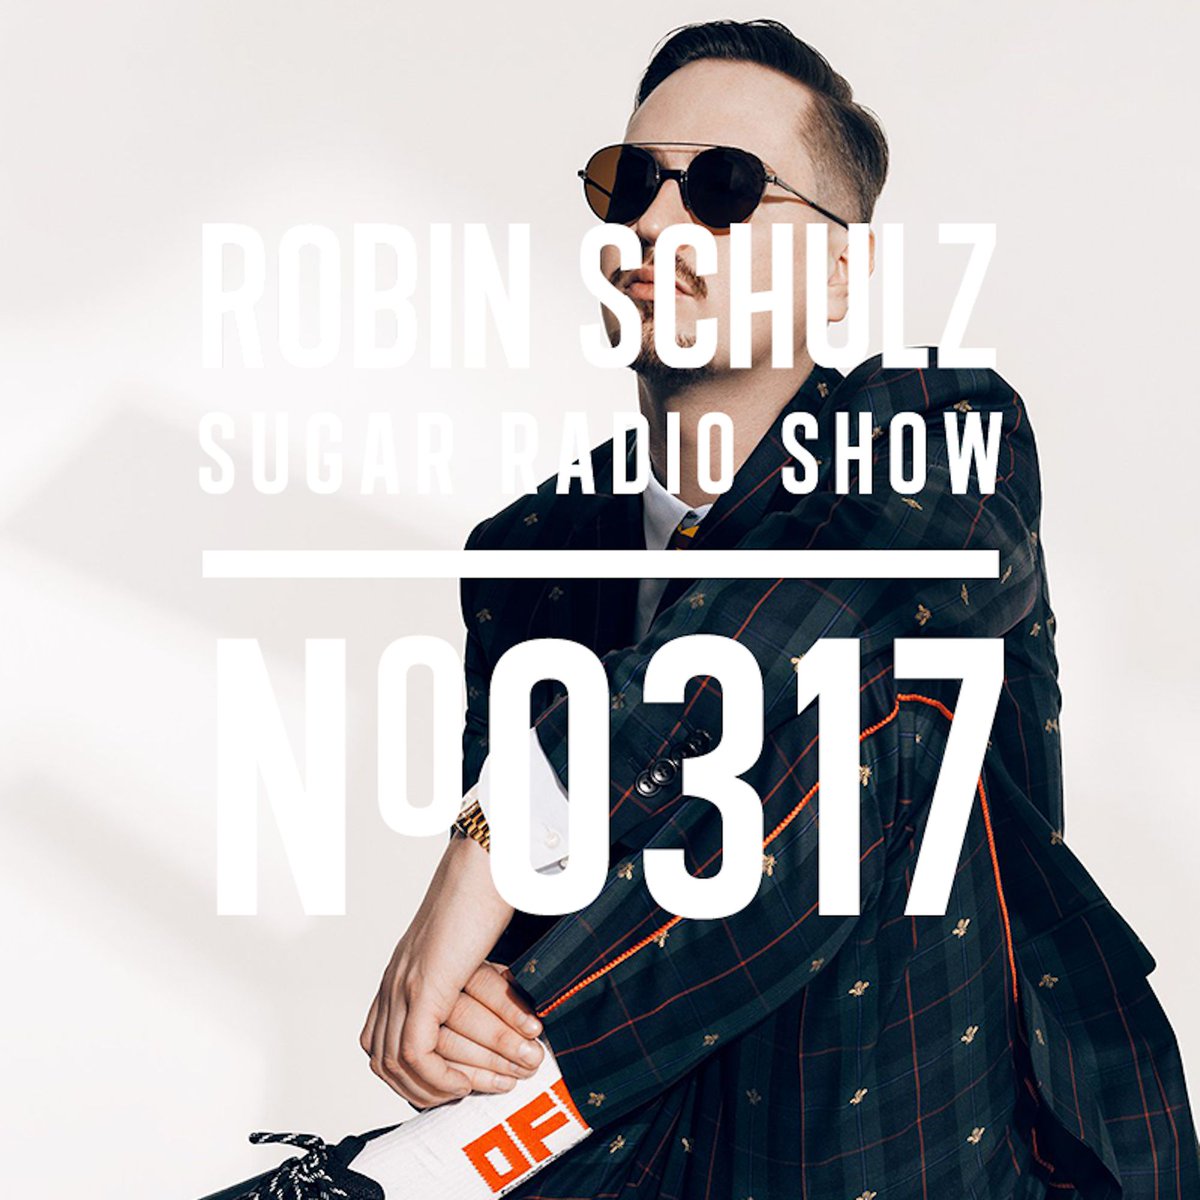 Today Robin Schulz is DJing for the 317th time at https://t.co/8g3SbusSqo! Yes - it starts again at 20:00! New music from Kvsh, Chocolate Puma, Claptone, Ferra Black, Nina Kraviz and of course Robin himself. https://t.co/qmHqIPaYdv